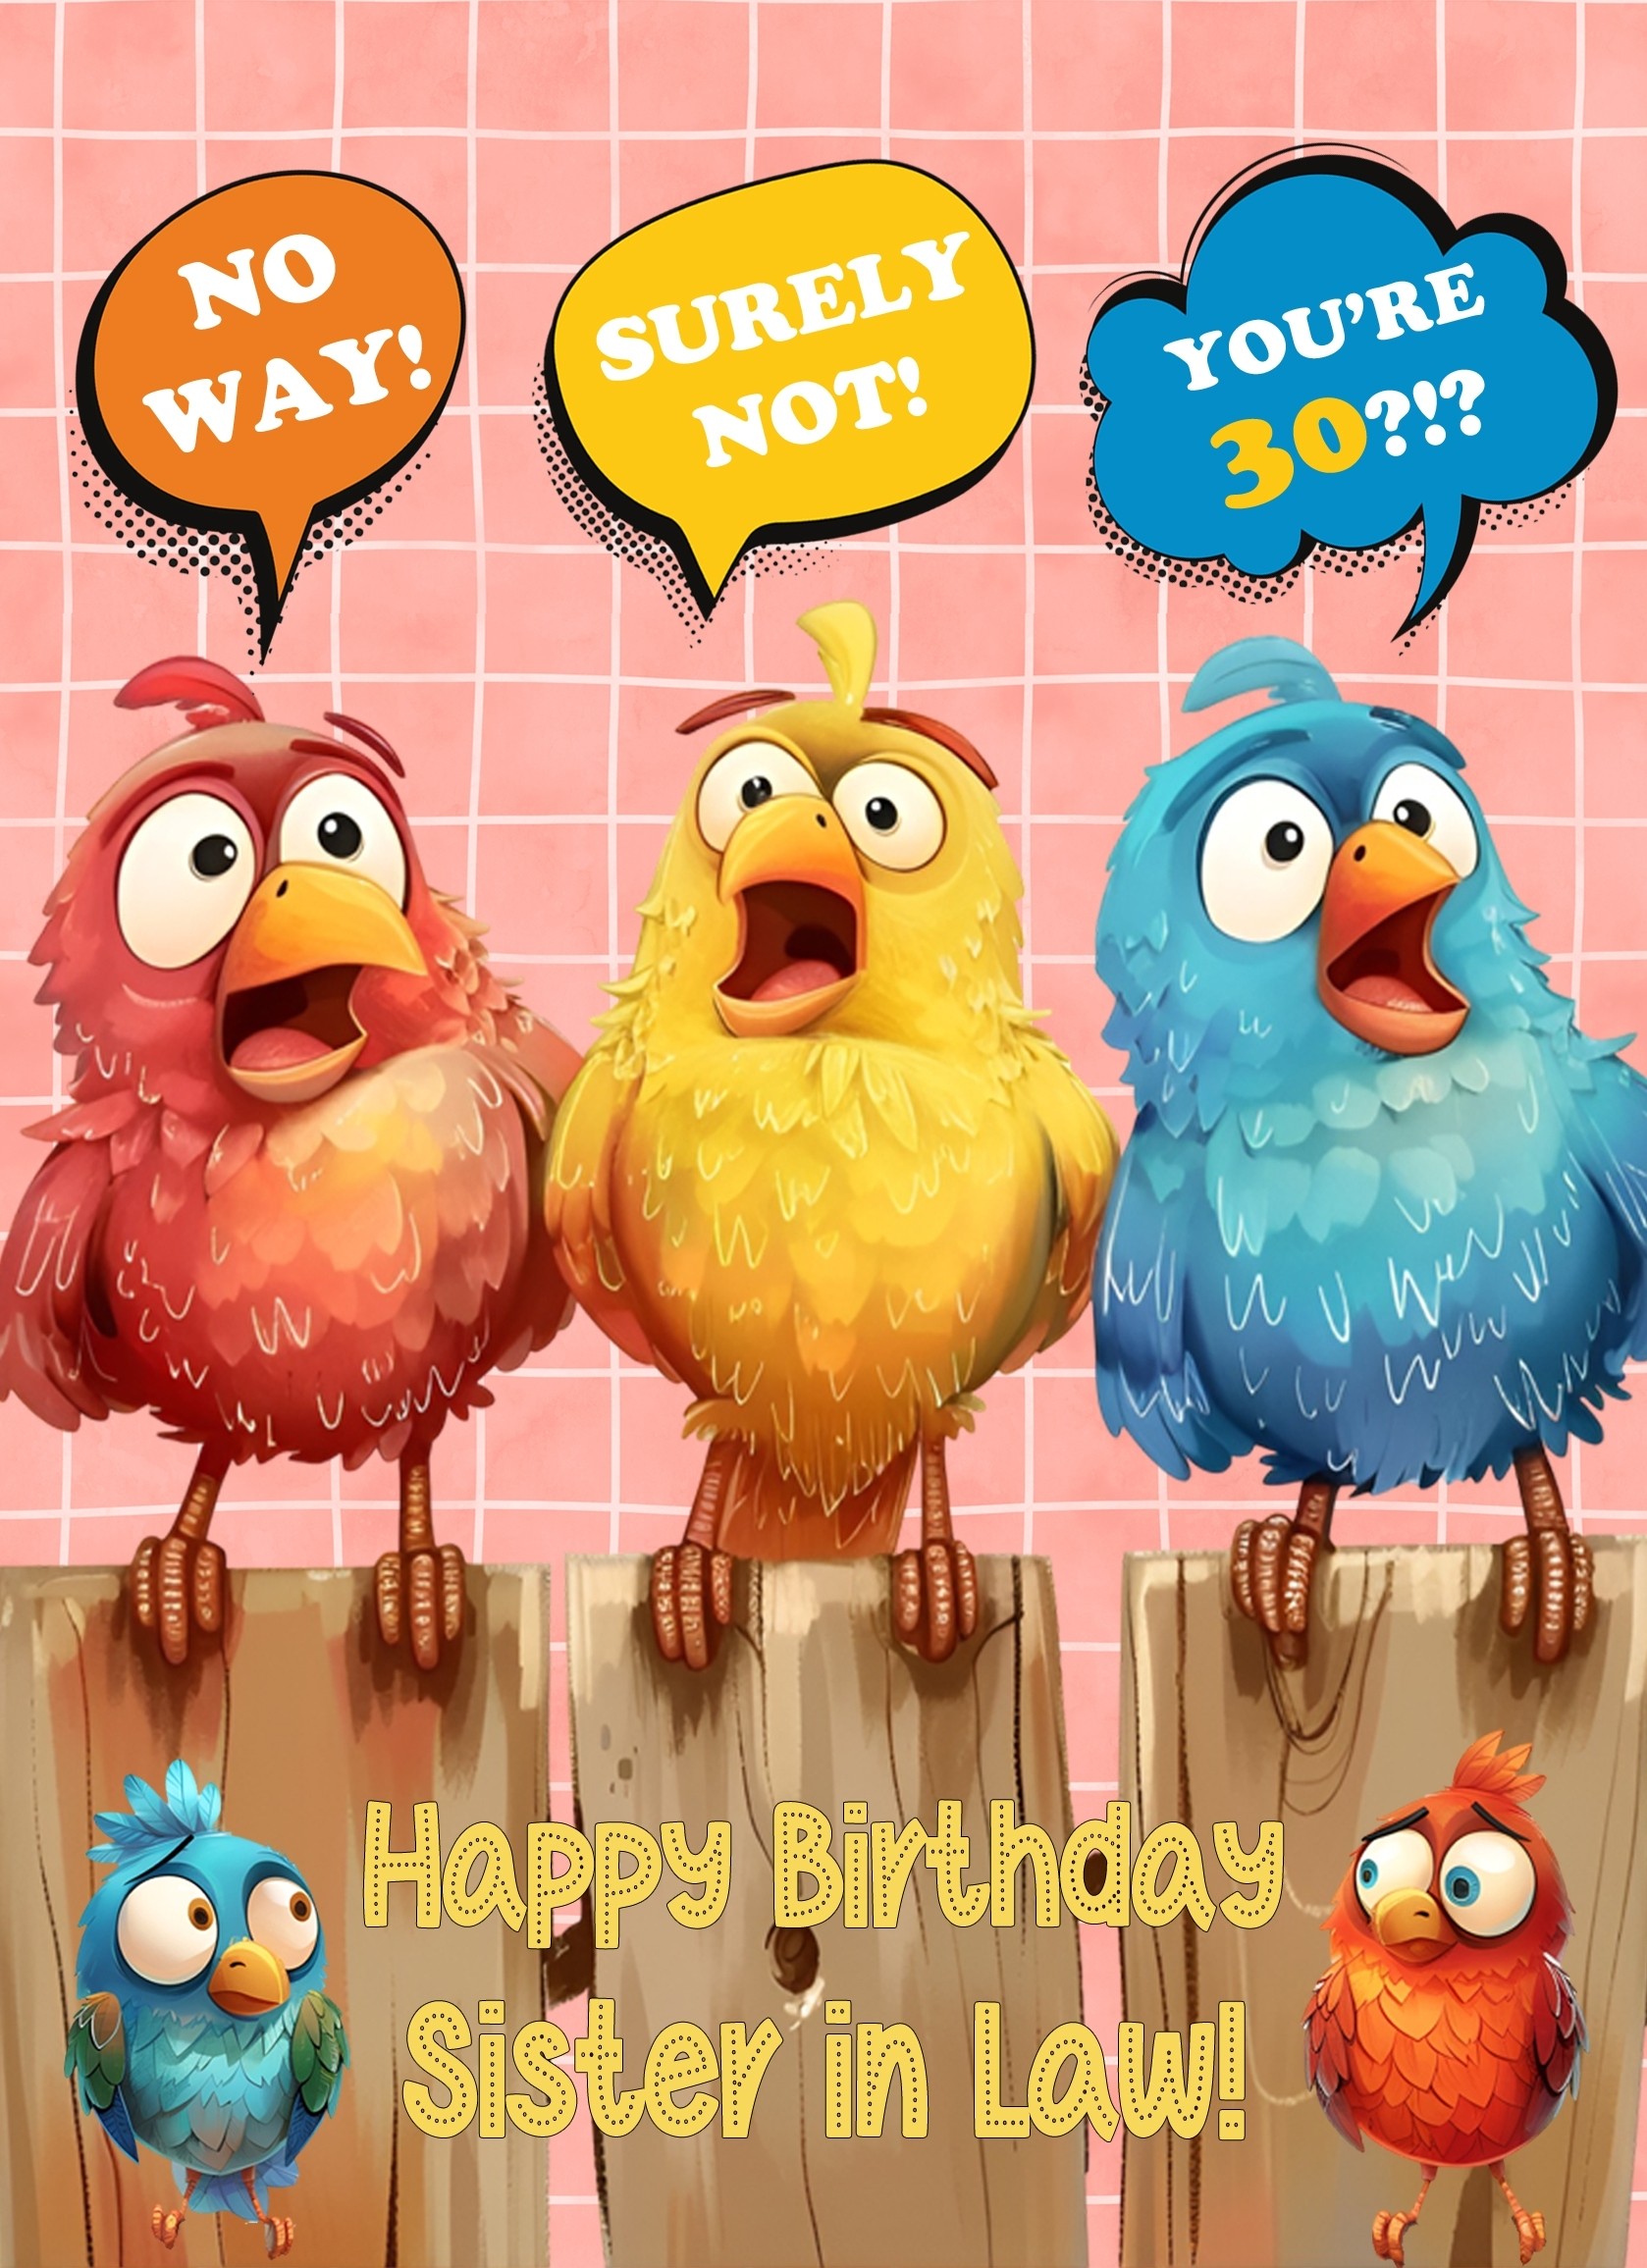 Sister in Law 30th Birthday Card (Funny Birds Surprised)